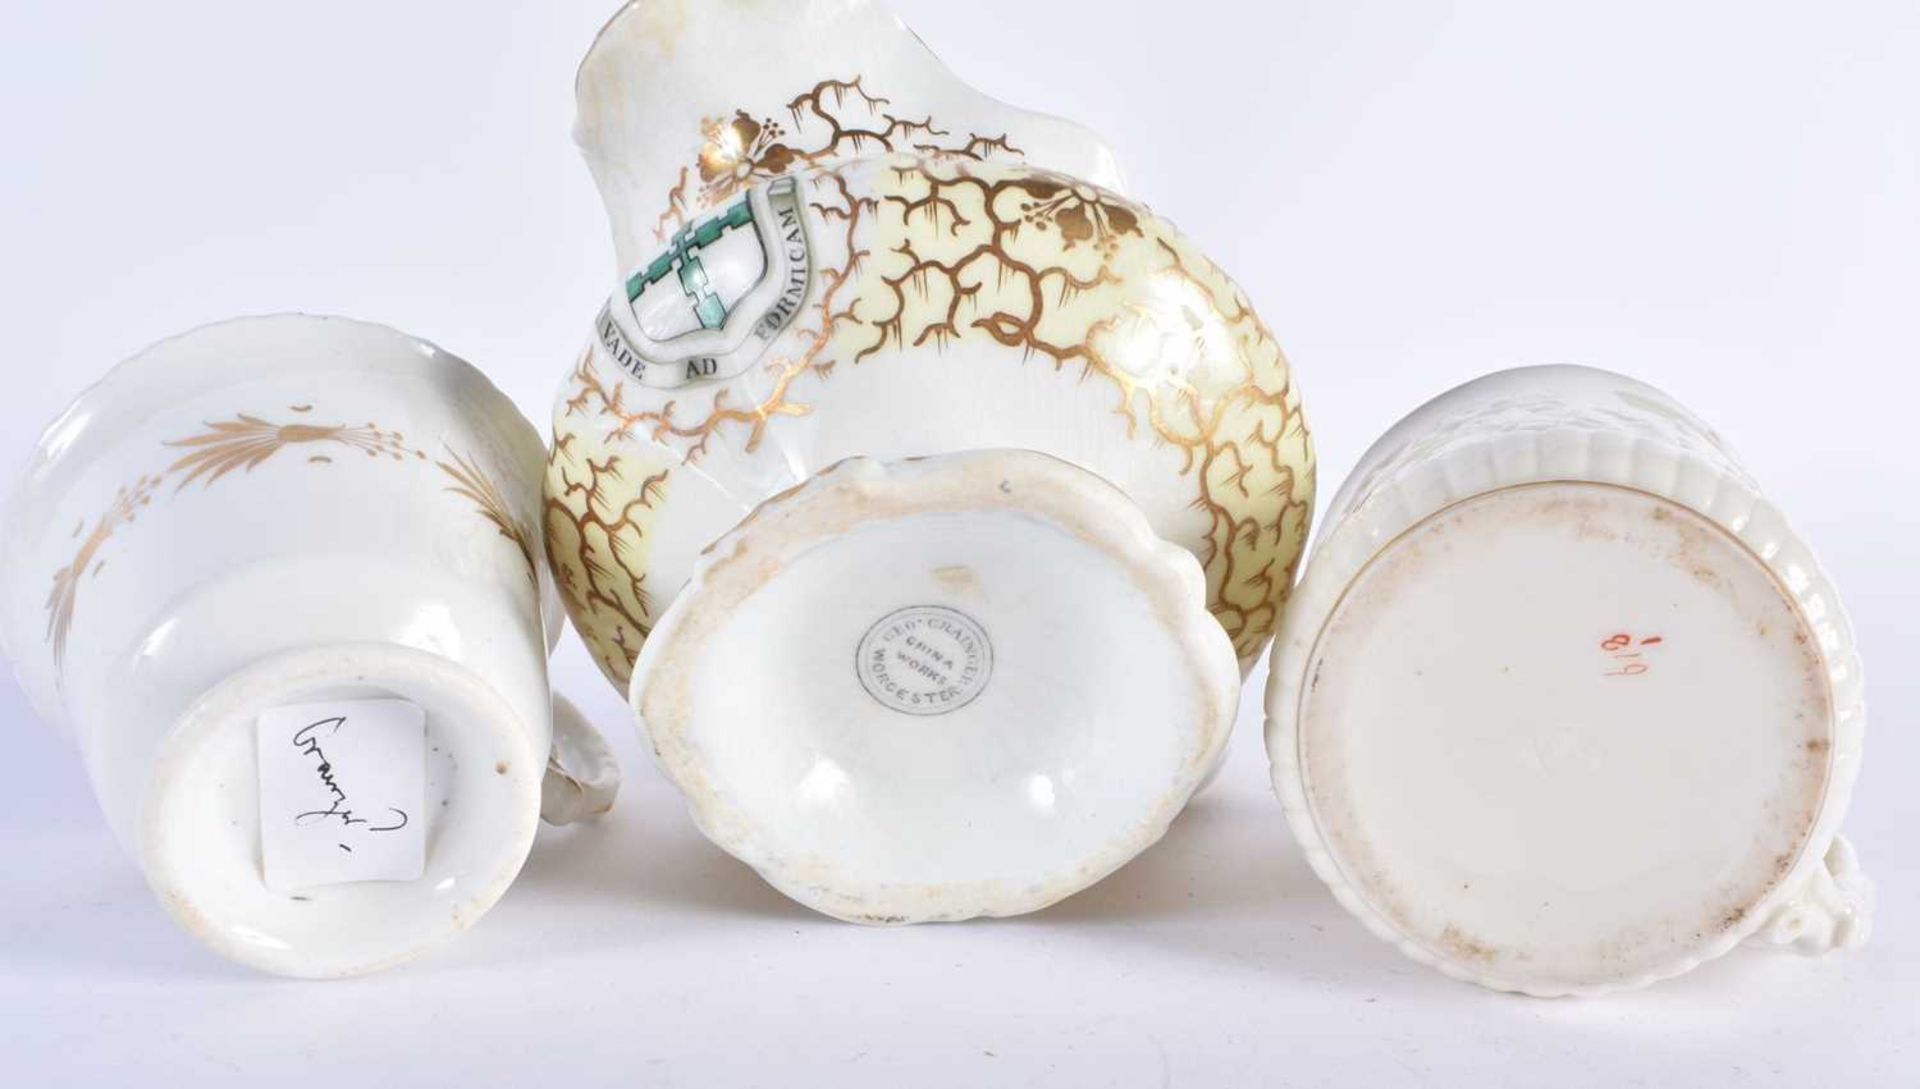 A COLLECTION OF 19TH CENTURY ENGLISH PORCELAIN CUPS AND SAUCERS in various forms and sizes. - Image 11 of 13